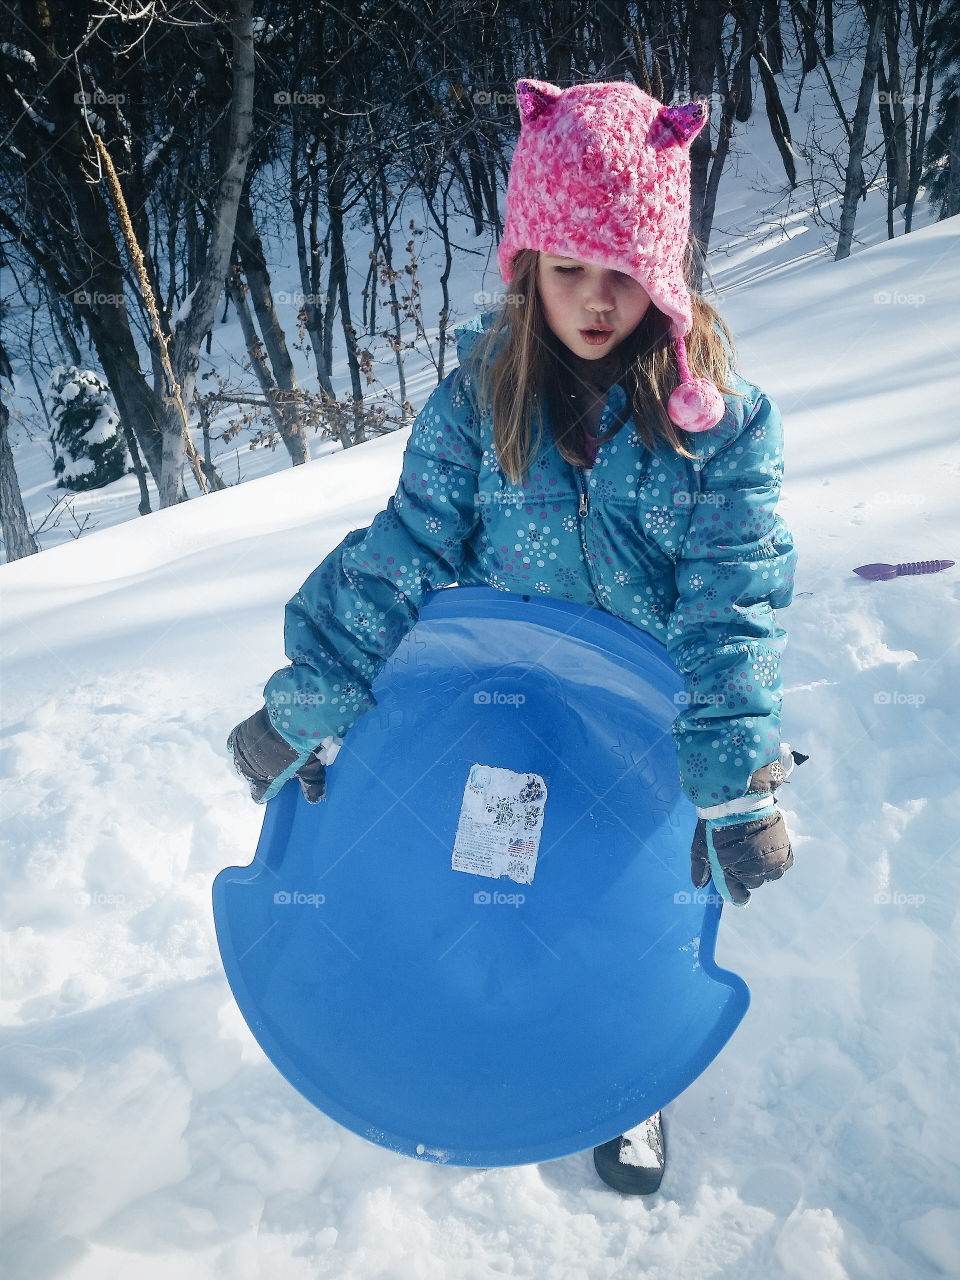 Girl holding a sled. Young white girl holding a blue sled in the snow